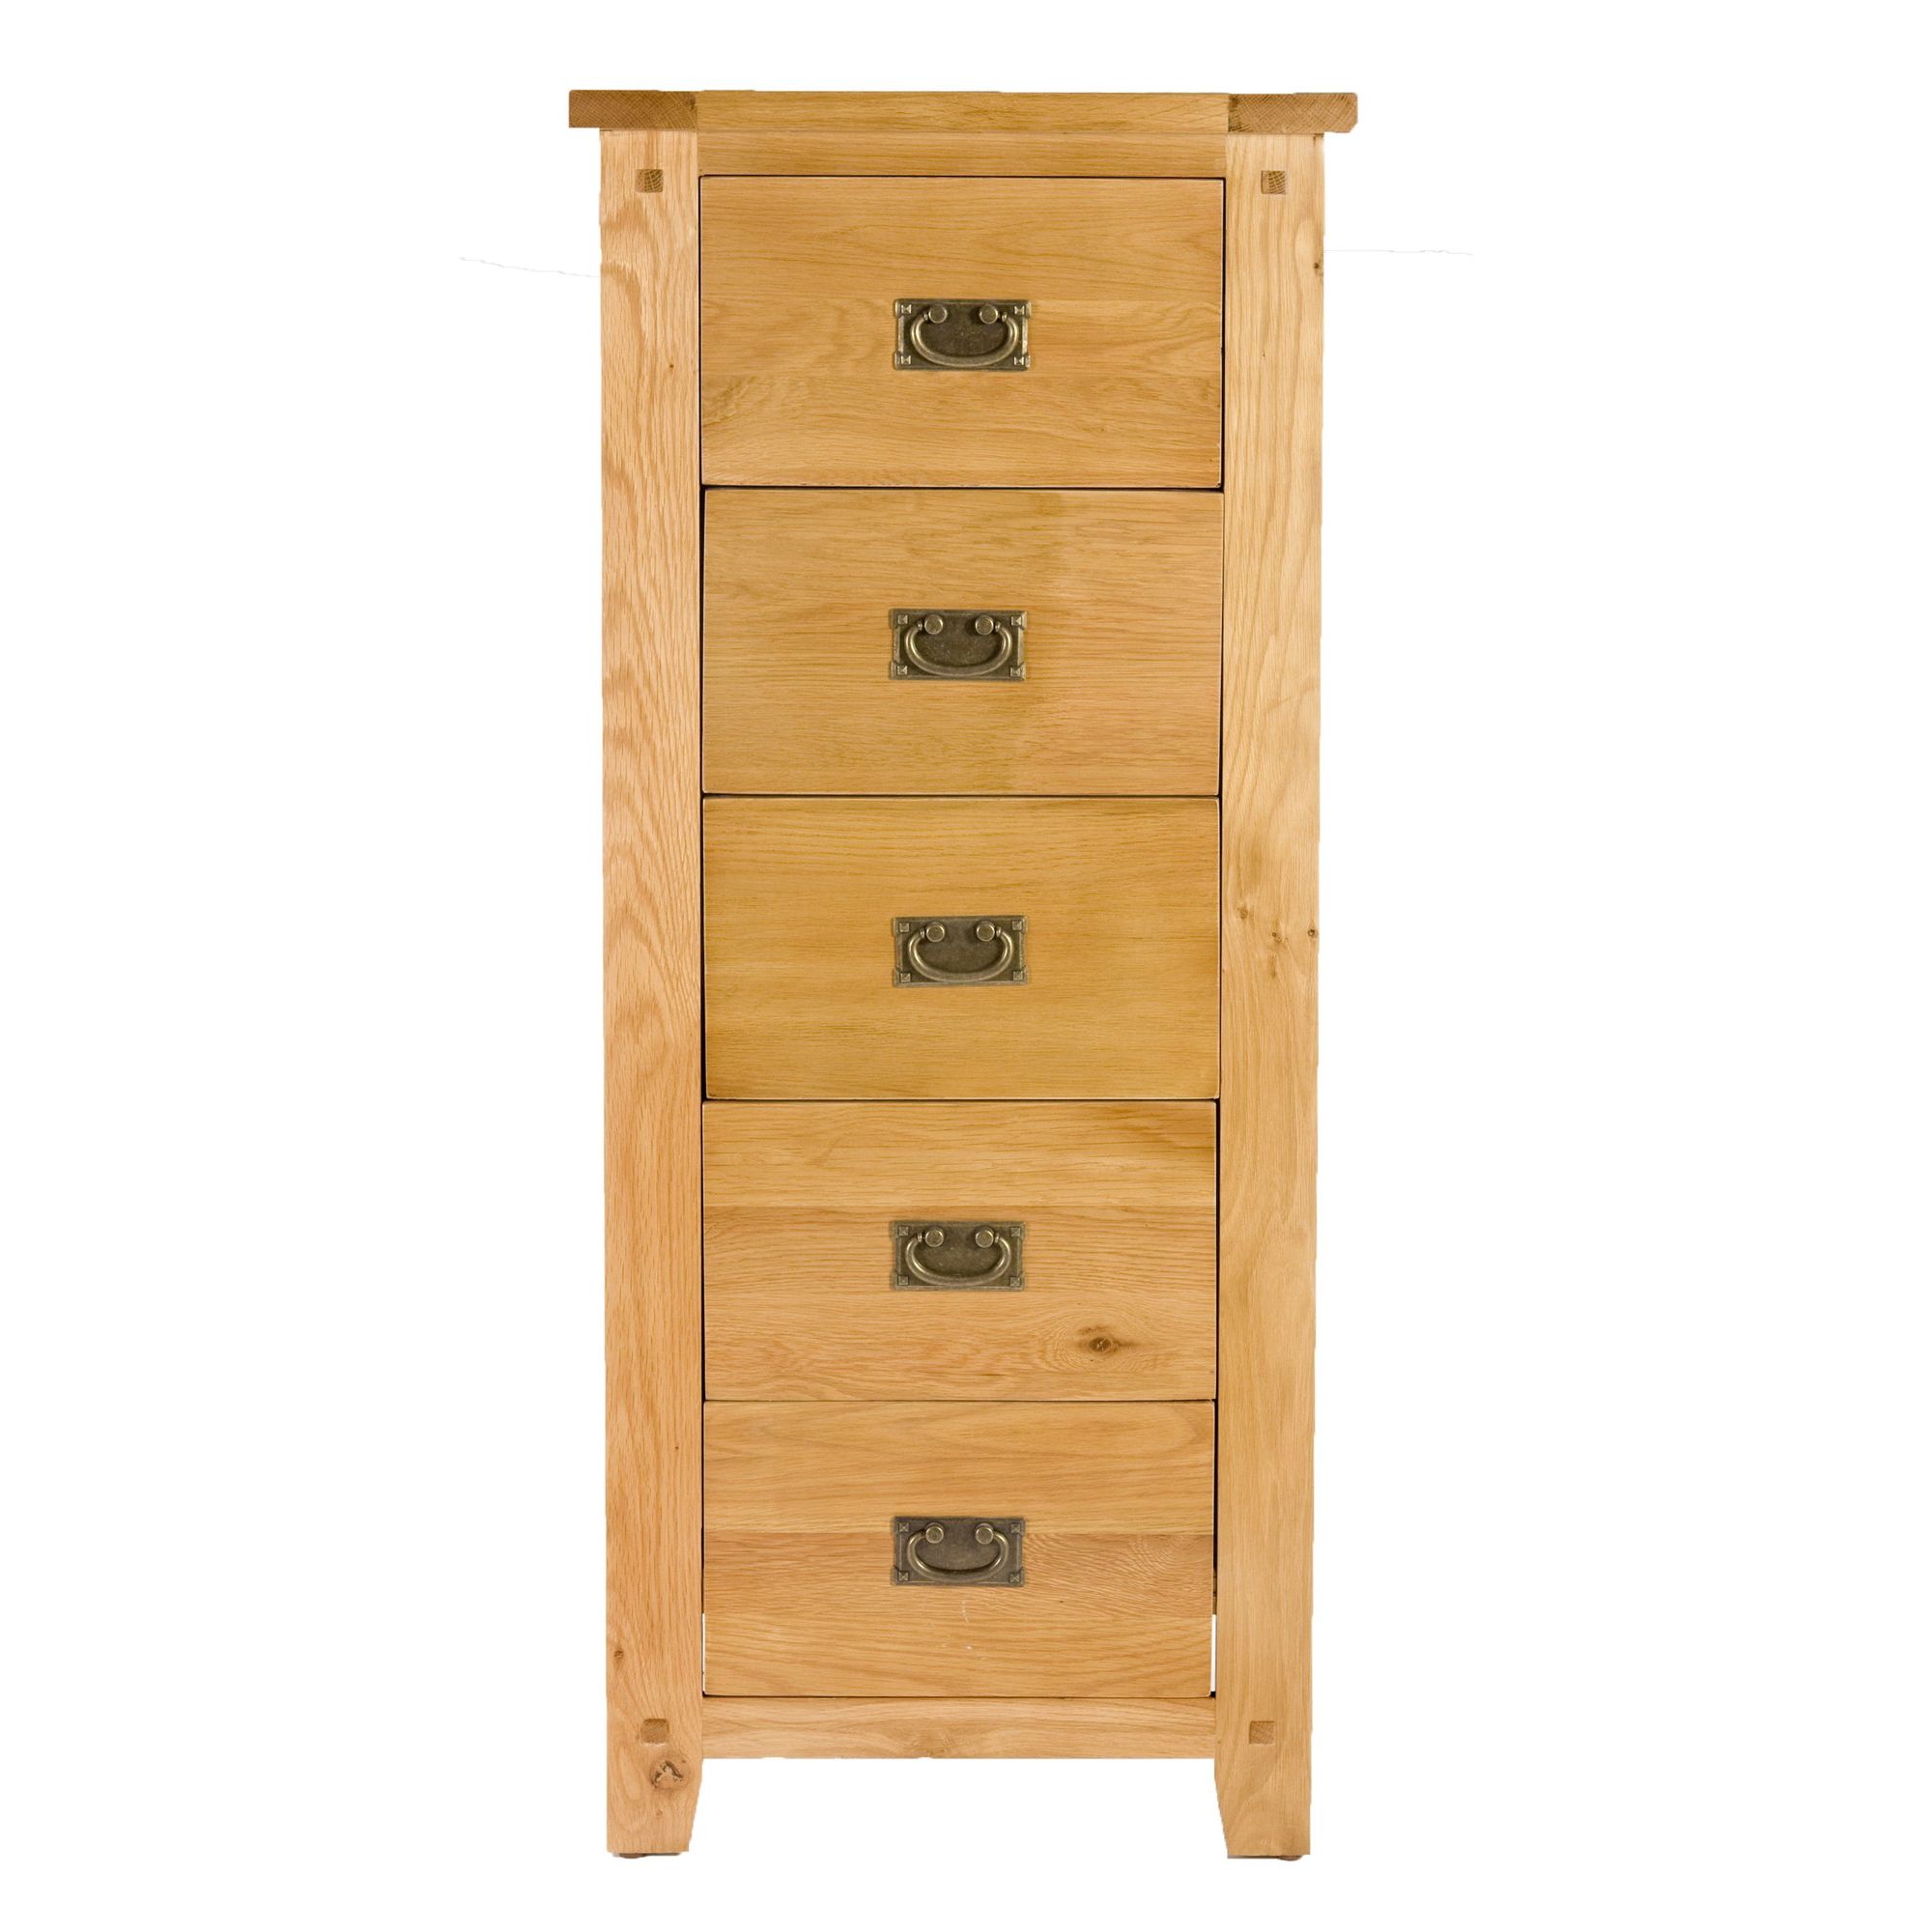 Elements Brunswick Bedroom Five Drawer Tall Chest in Warm Lacquer at Tesco Direct